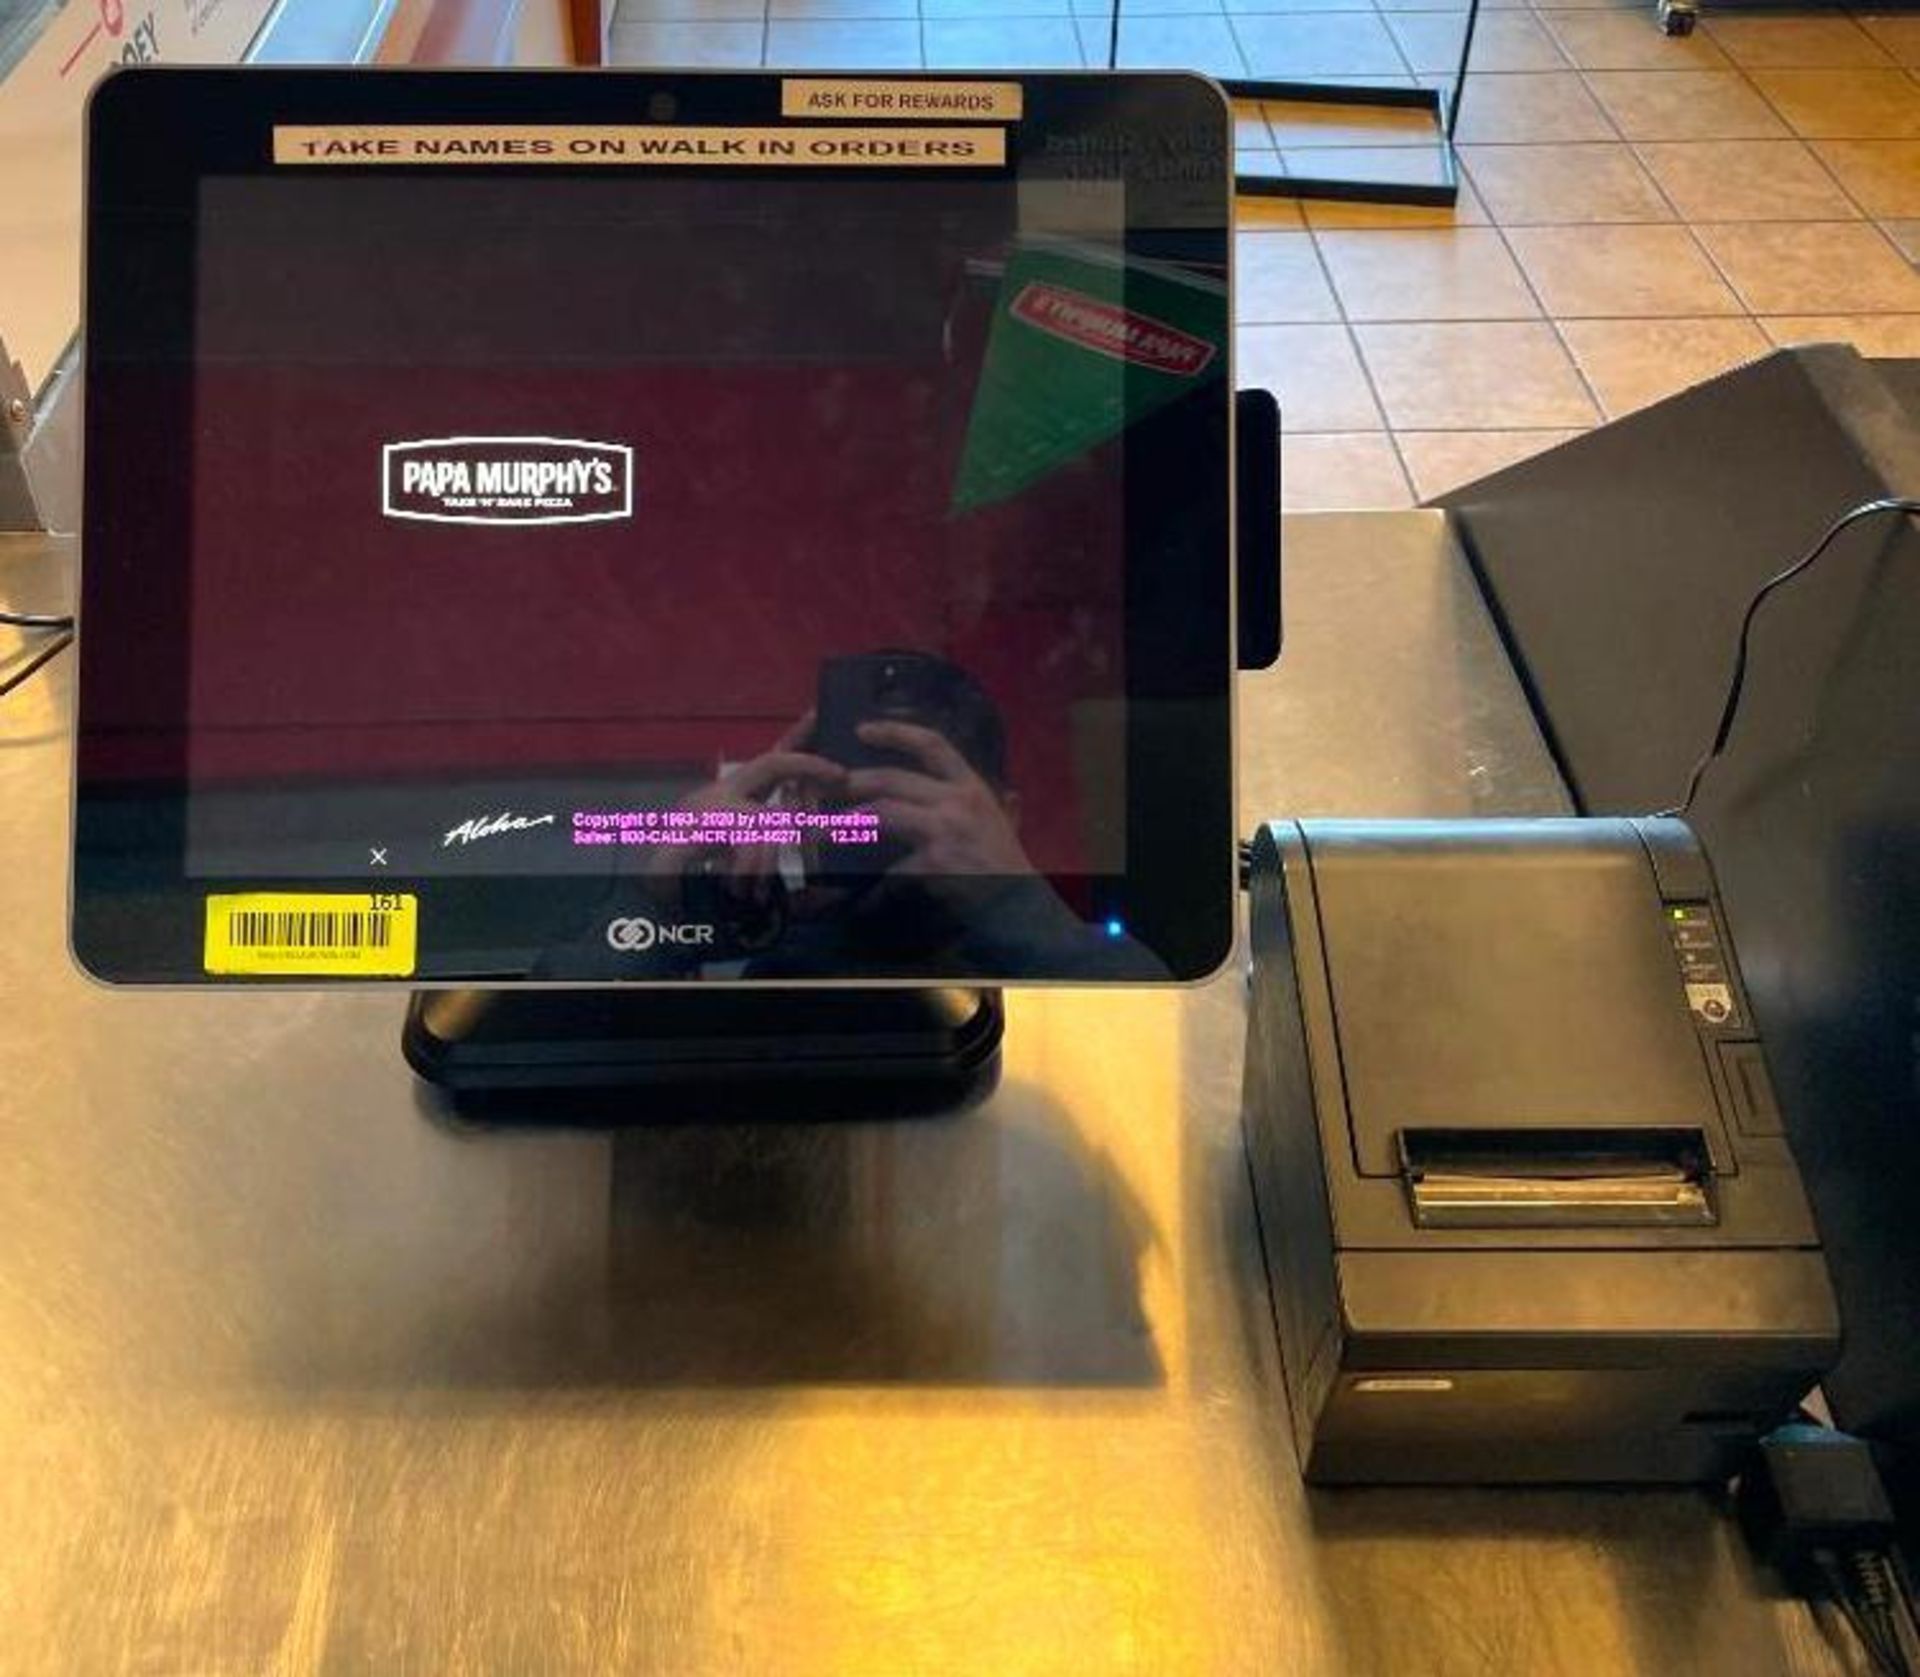 DESCRIPTION: NCR TOUCH SCREEN POS SYSTEM WITH (3) TERMINALS LOCATION: 901 FM 544 SUITE 200 WYLIE, TX